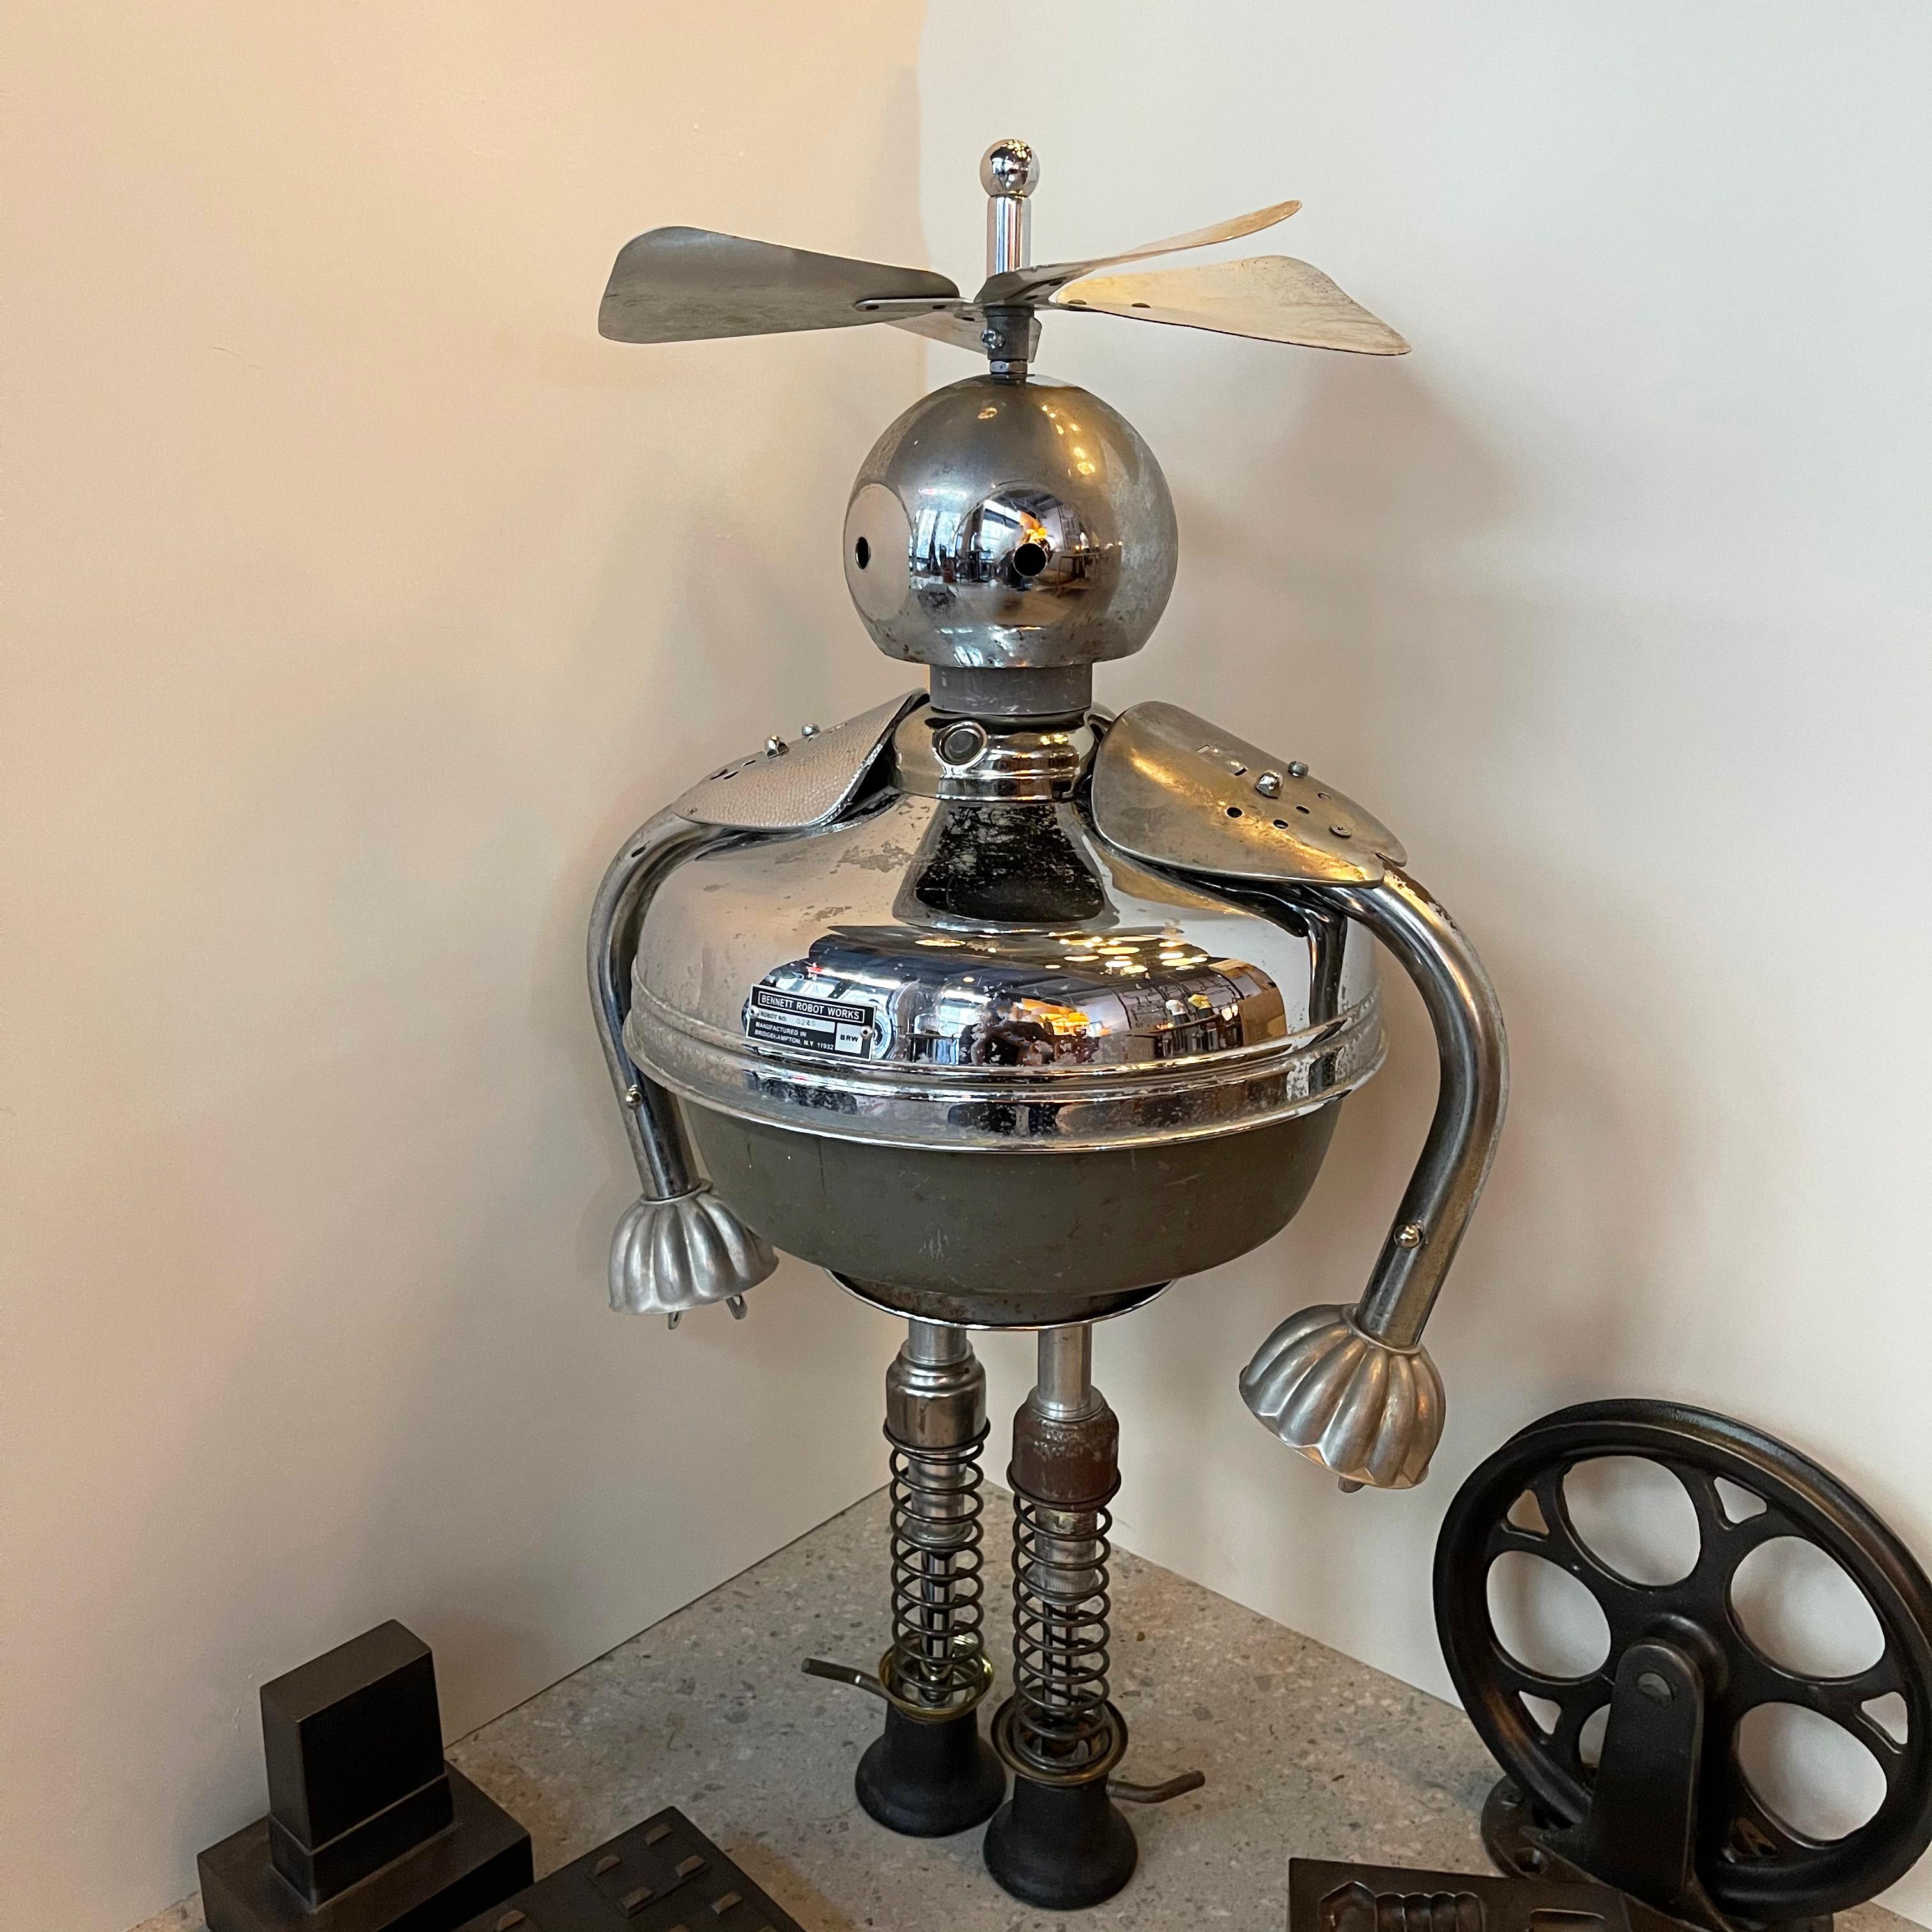 Custom robot sculpture named Rohl by Bennett Robot Works, Brooklyn, NY

Bennett Robot Works, robot sculptures created by Gordon Bennett, are composed of found, vintage objects used in their unaltered entirety. They are inspired by Norman Bel